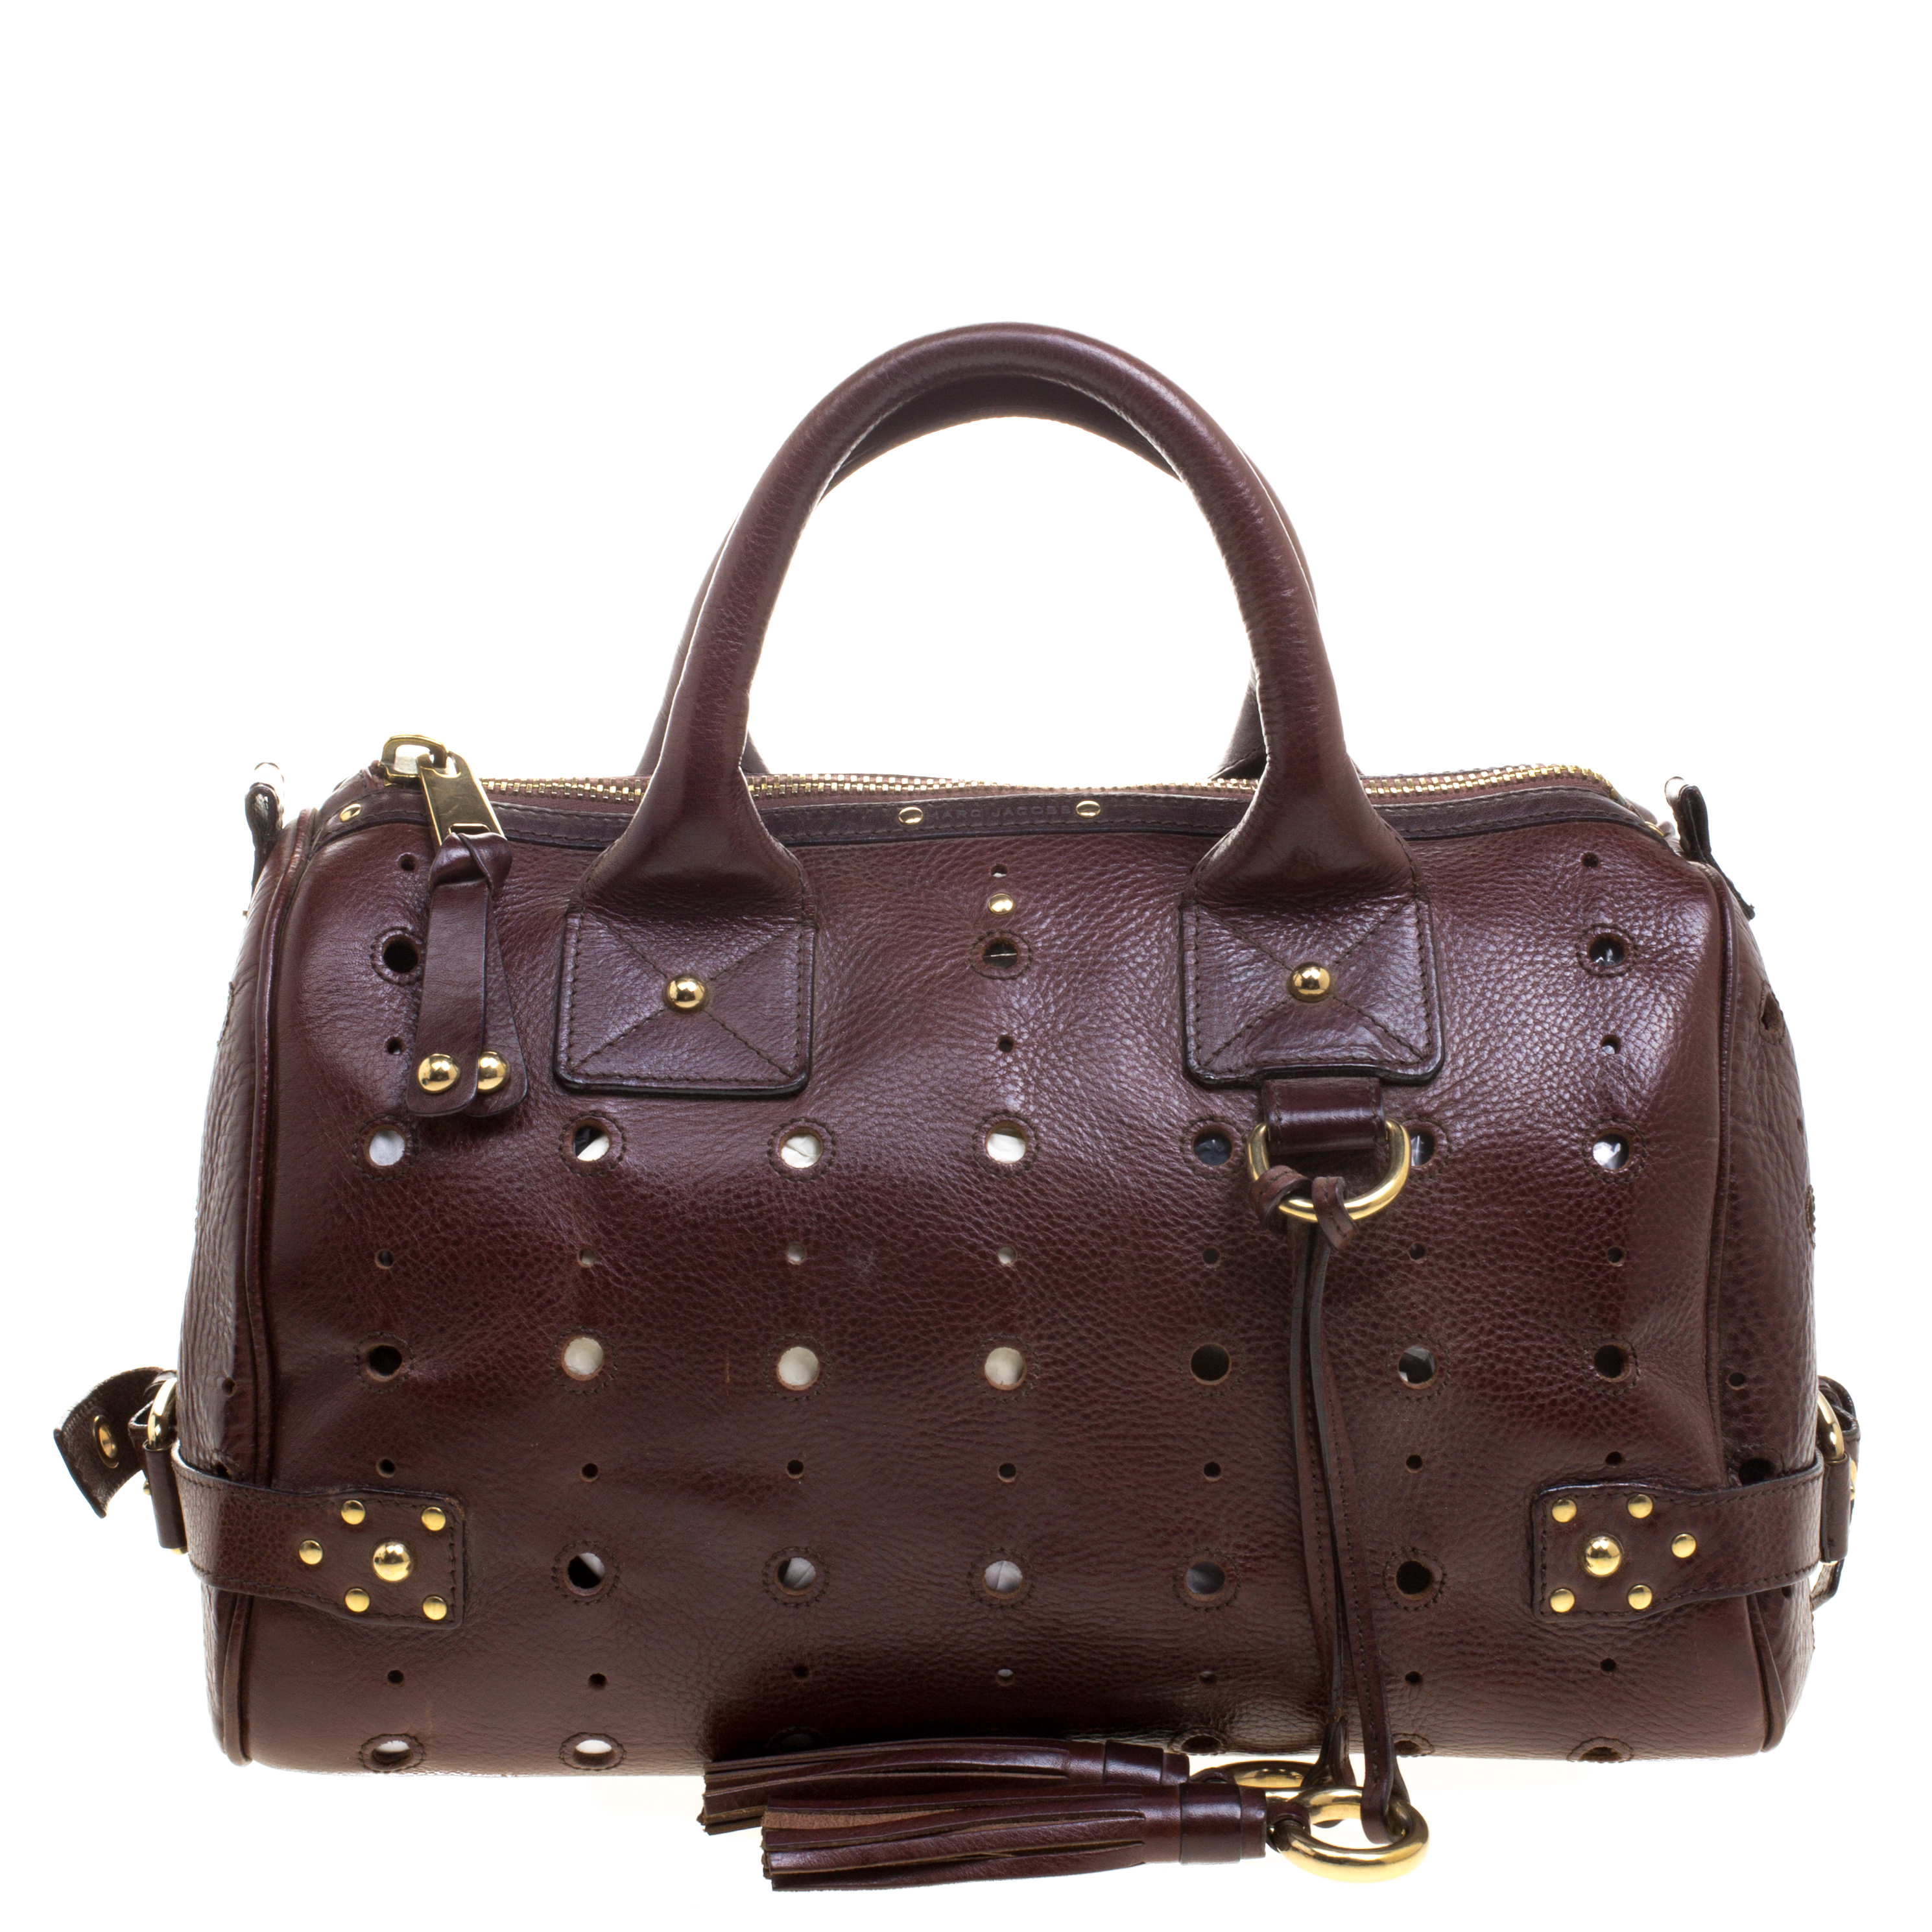 Marc Jacobs Brown Perforated Leather Satchel